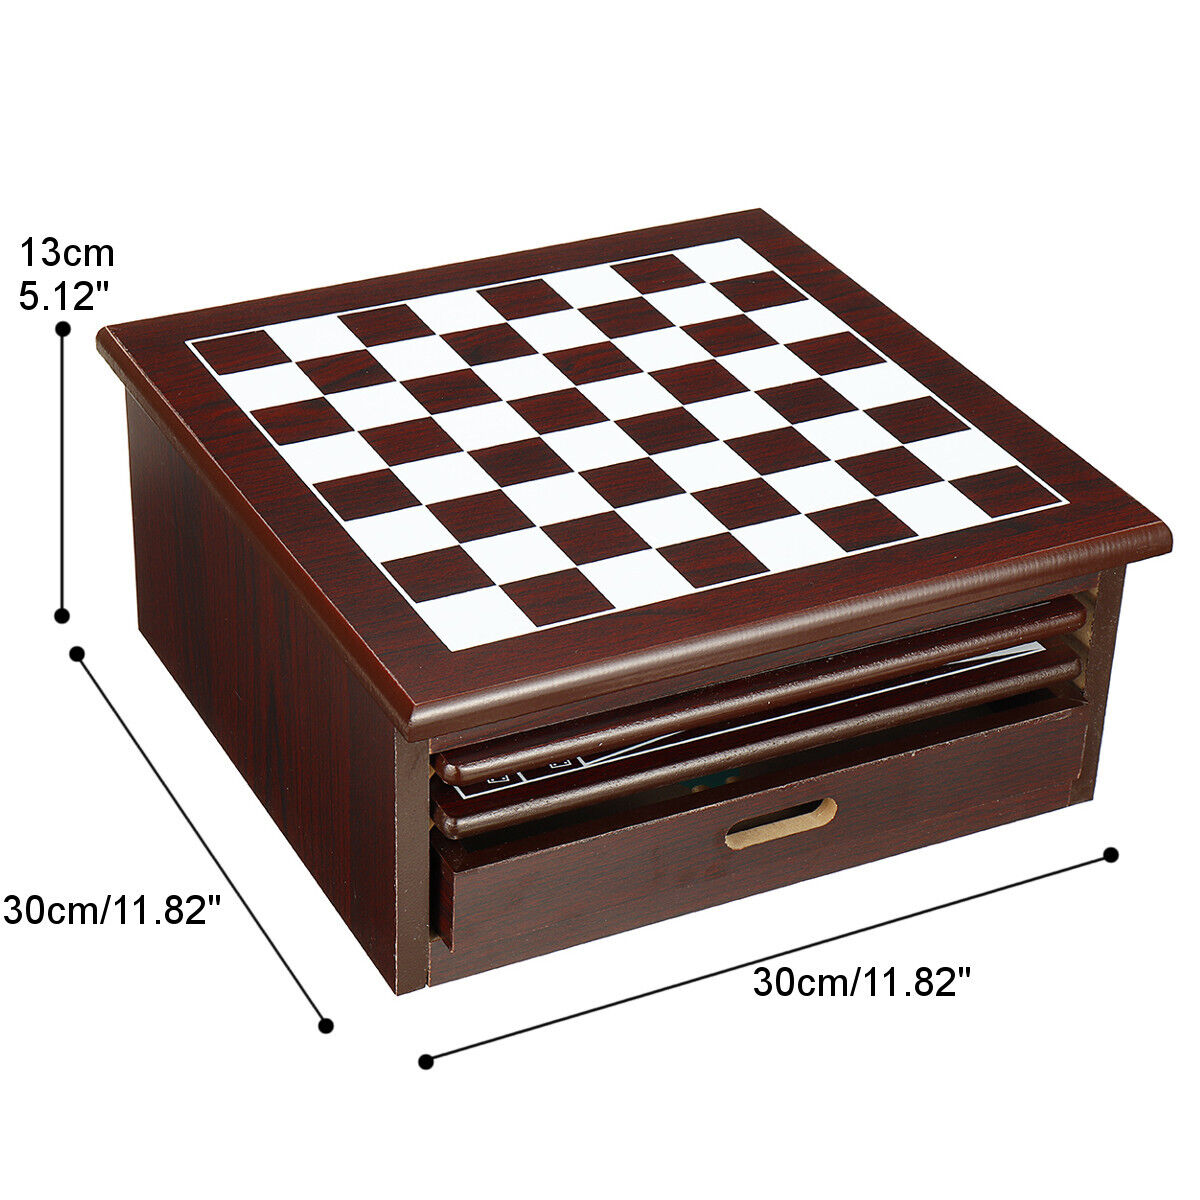 15in1 Chess Board Wooden Games House Toy Set Backgammon Checkers Snakes